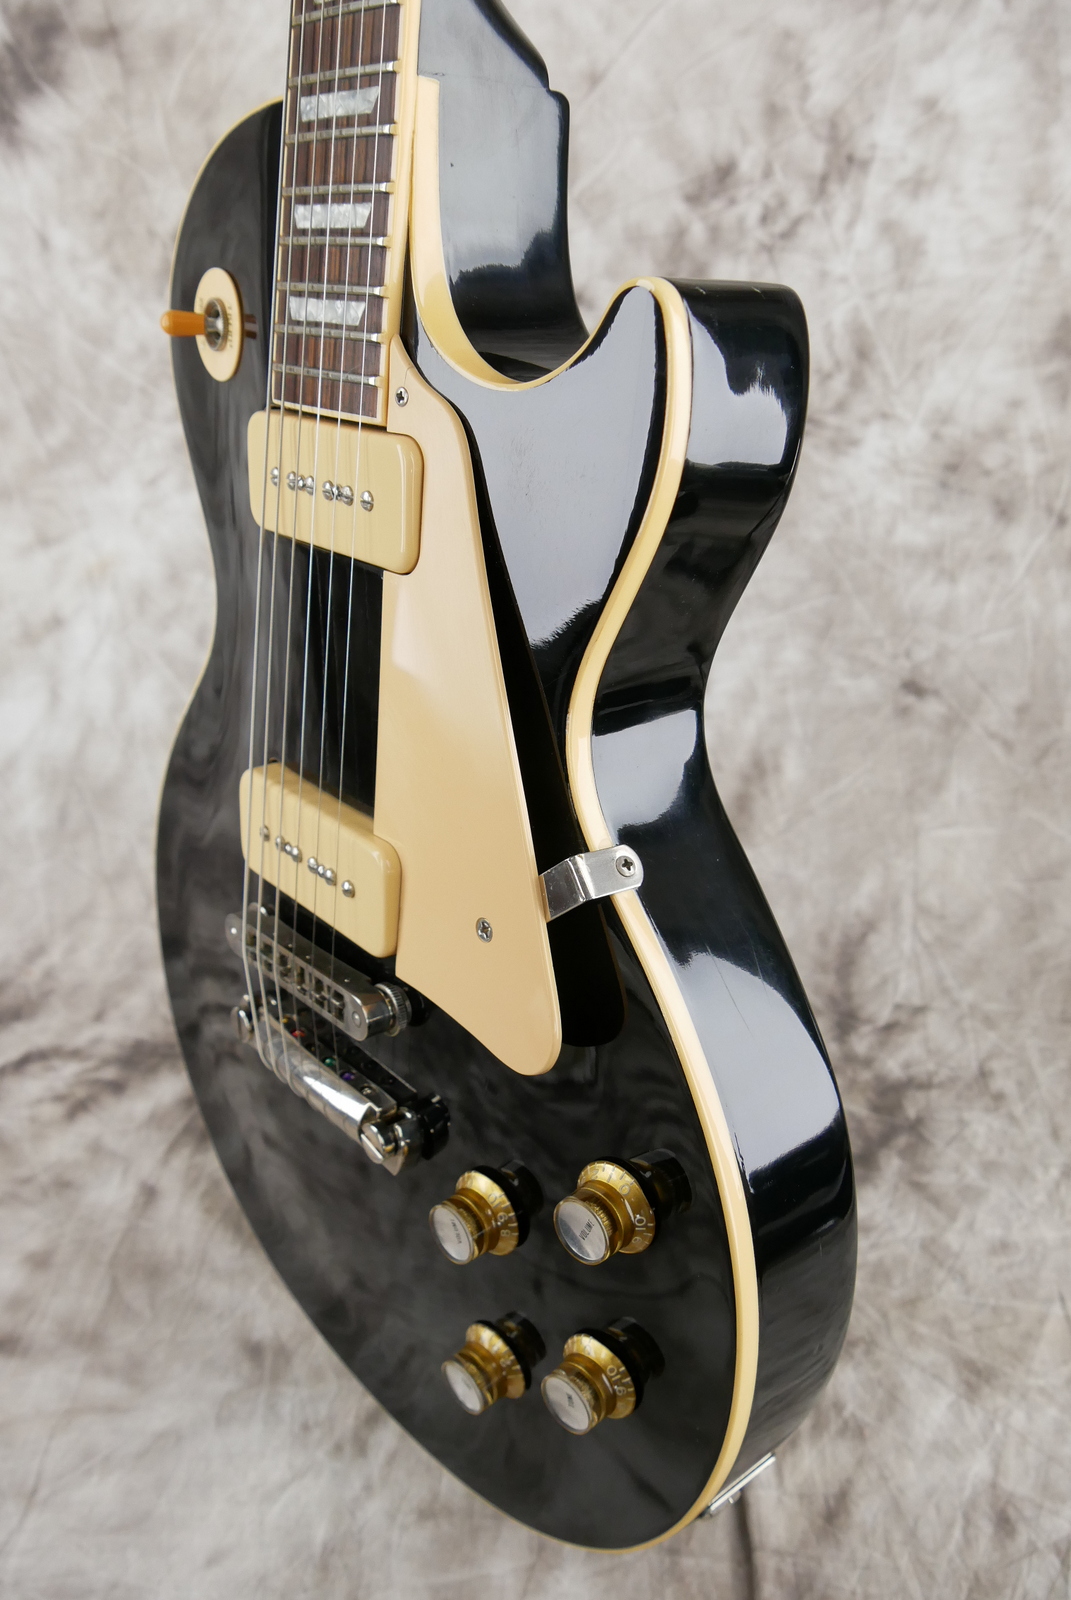 img/vintage/5337/Gibson_Les_Paul_Deluxe_limited_edtion_black_2000-006.JPG